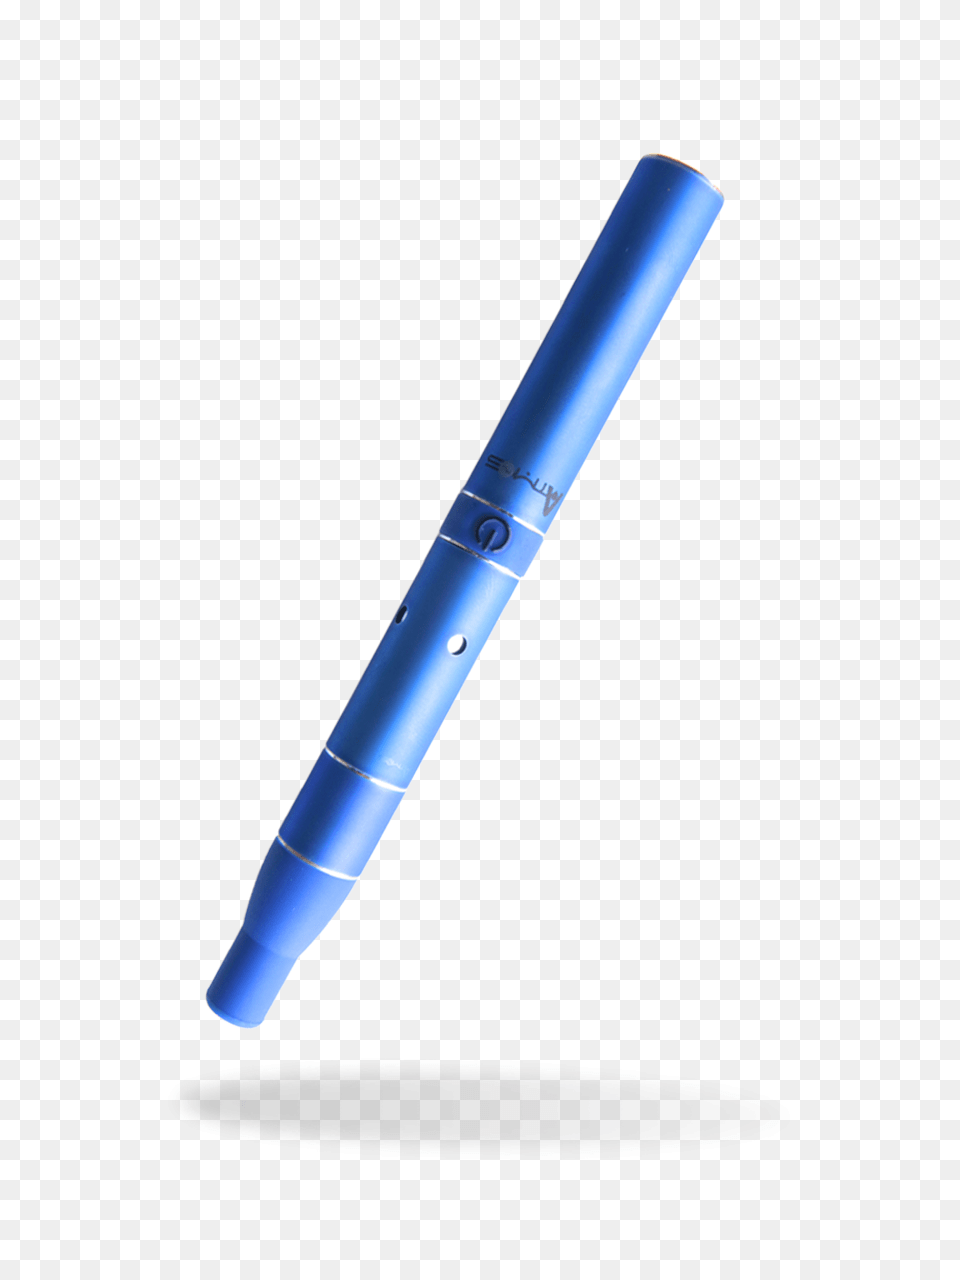 Atmos Rx Vaporizer Review, Electrical Device, Microphone, Light, Baton Free Png Download